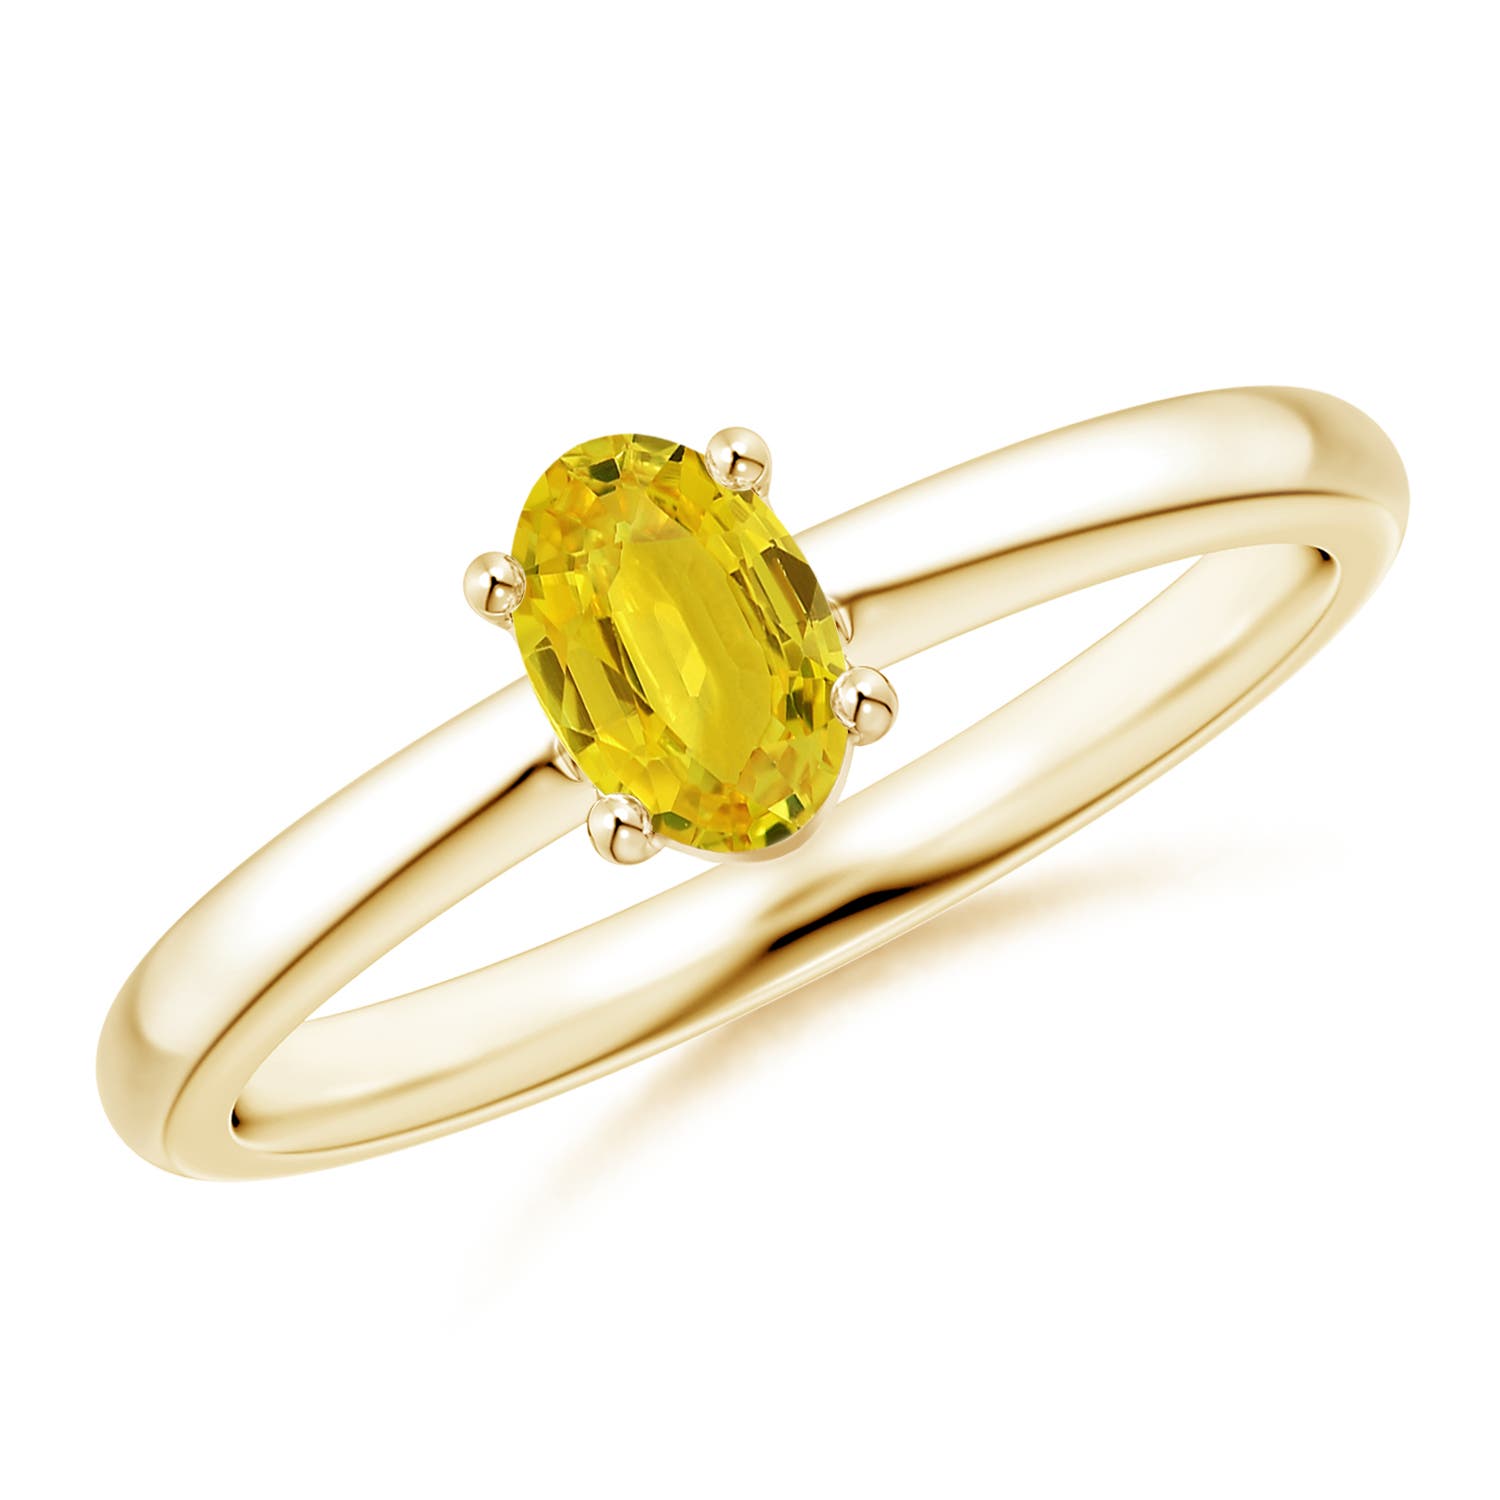 Chopra Gems Yellow Sapphire Ring Adjustable Pukhraj Gemstone Ring for Men  and Women Brass Sapphire Gold Plated Ring Price in India - Buy Chopra Gems Yellow  Sapphire Ring Adjustable Pukhraj Gemstone Ring